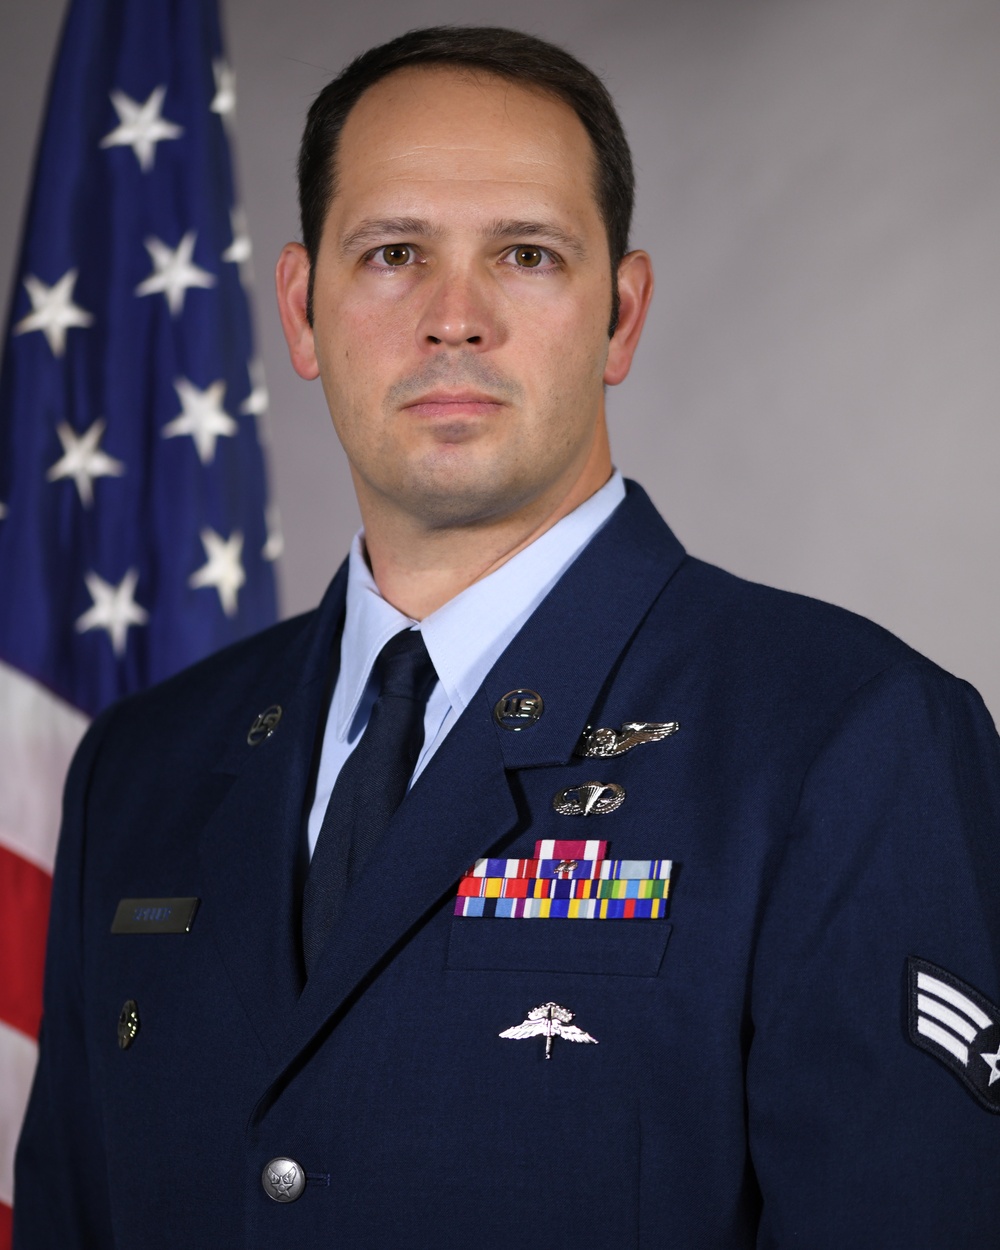 Senior Airman Adam Spinner, a Westhampton Beach resident, is Airman of the Year for New York Air Guard and northeast region